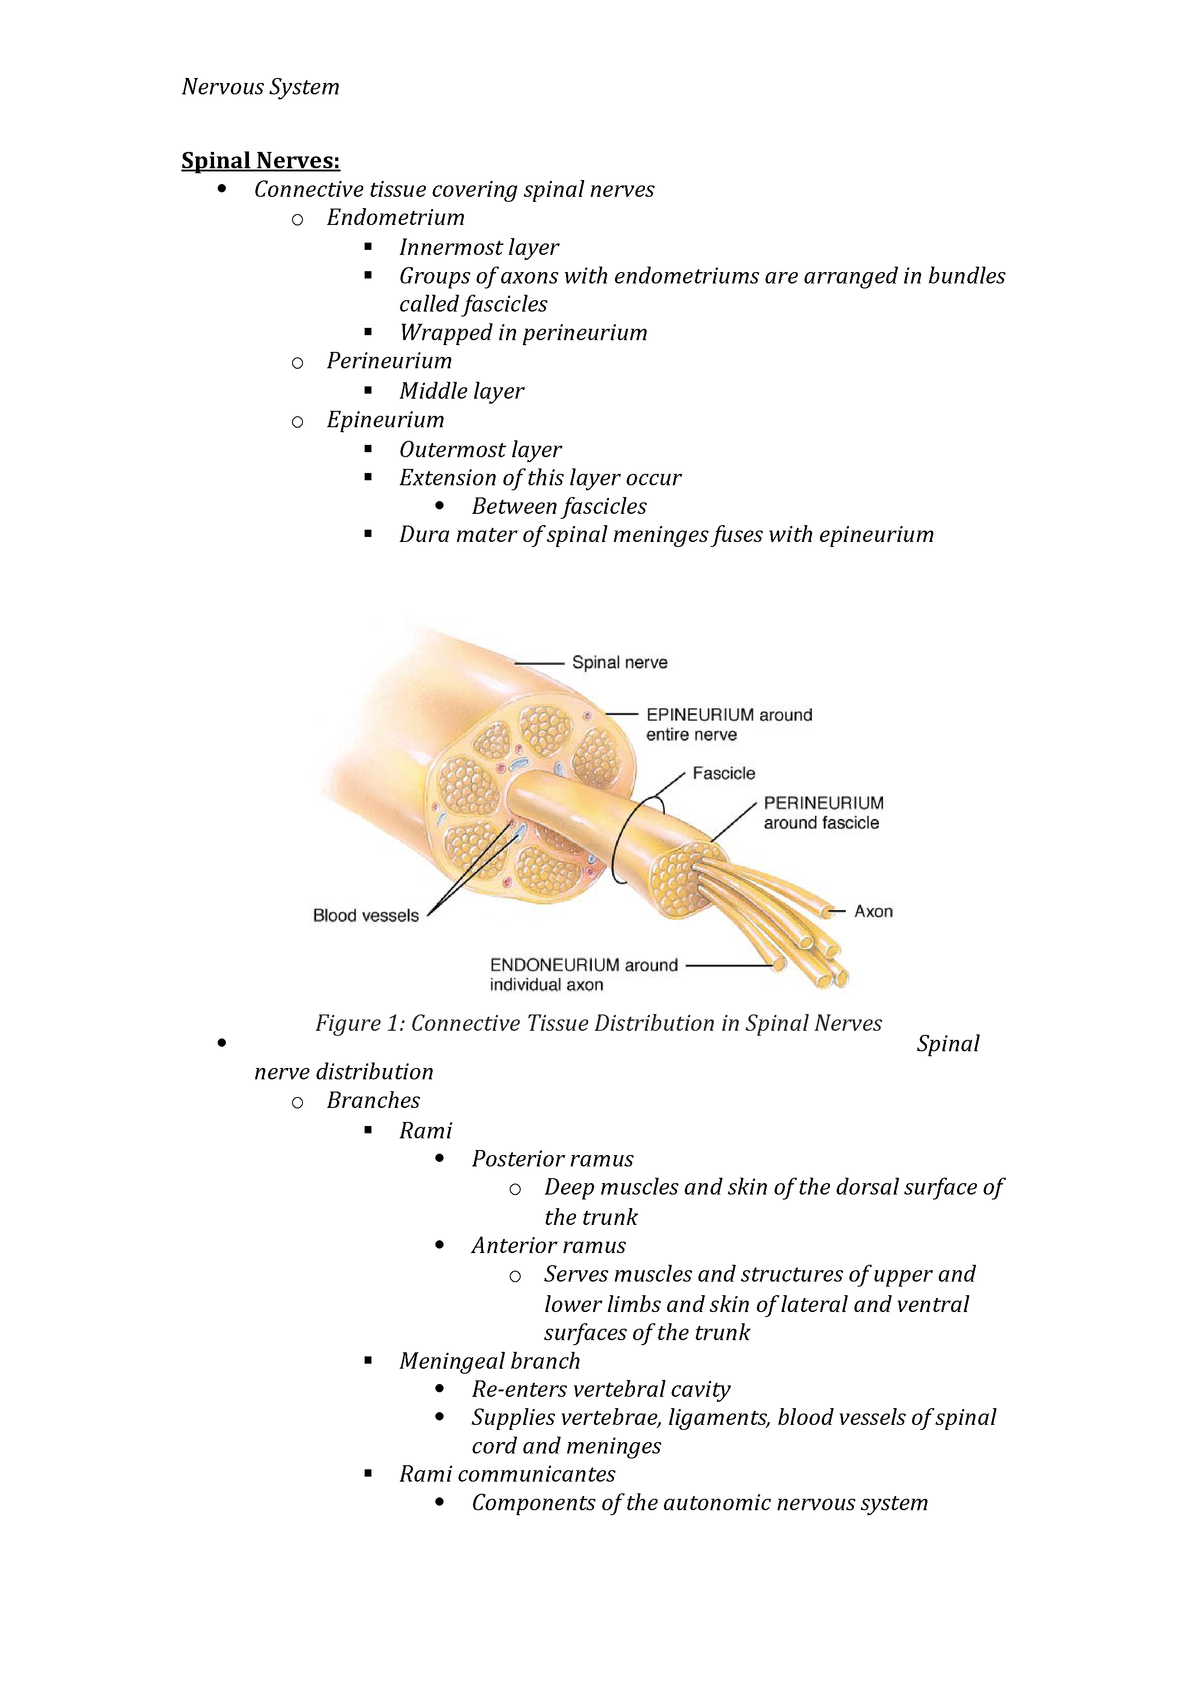 Spinal Nerves Lecture Notes - StuDocu